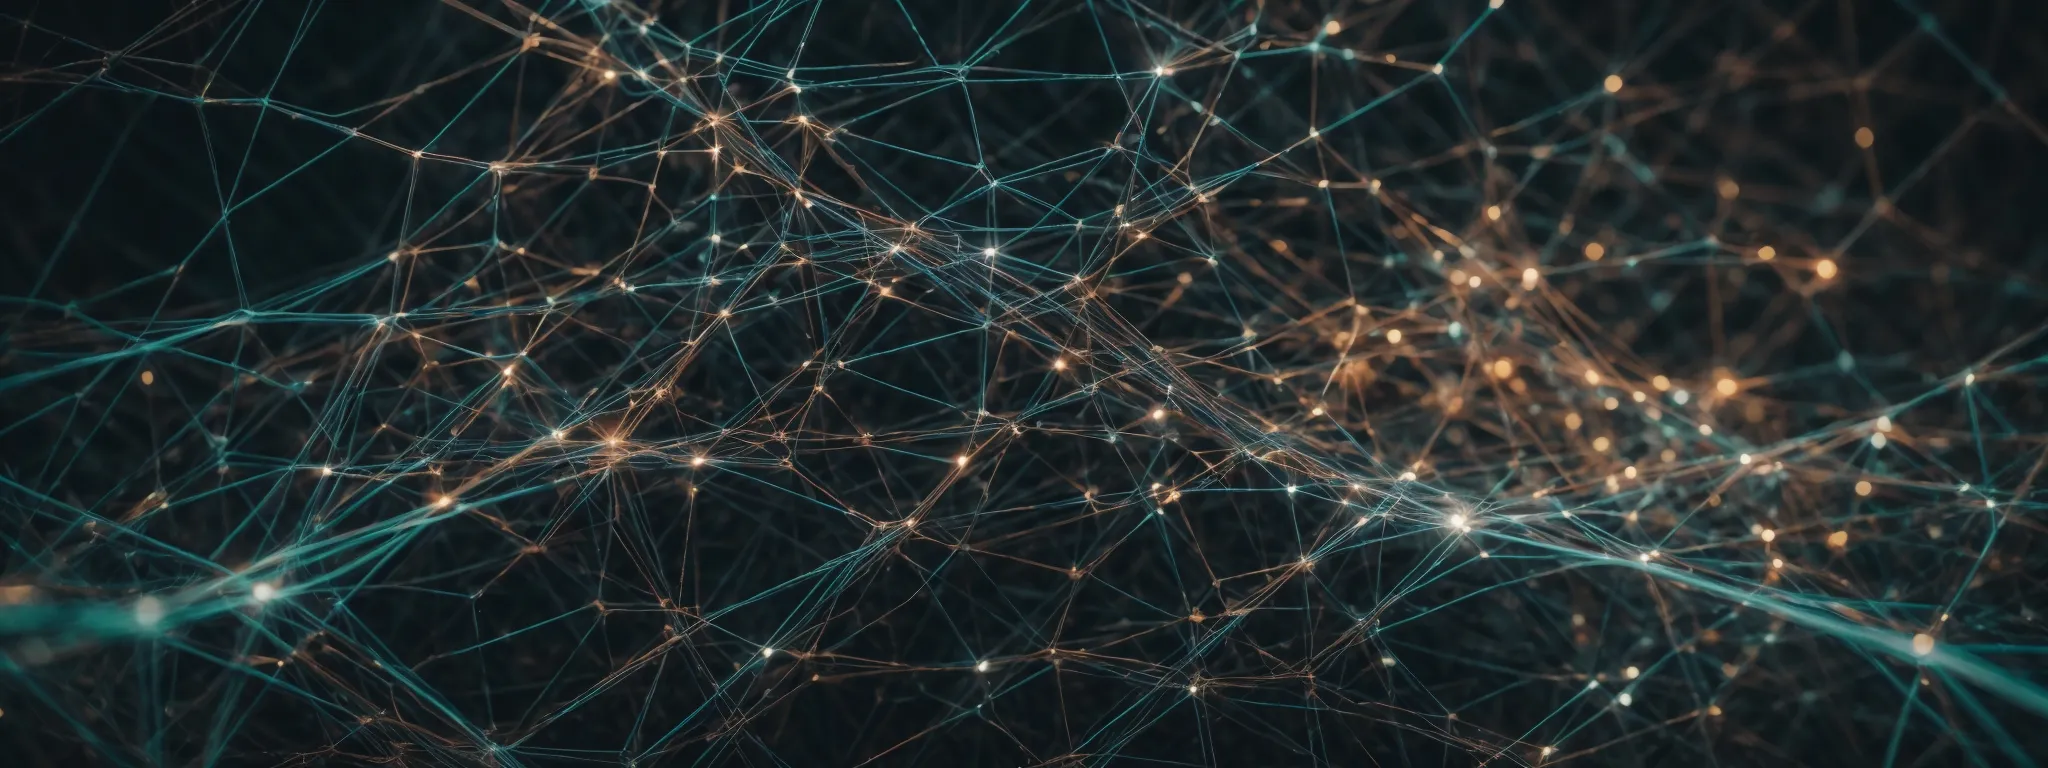 a web of interconnected nodes symbolizing a network of links expanding across a digital landscape.